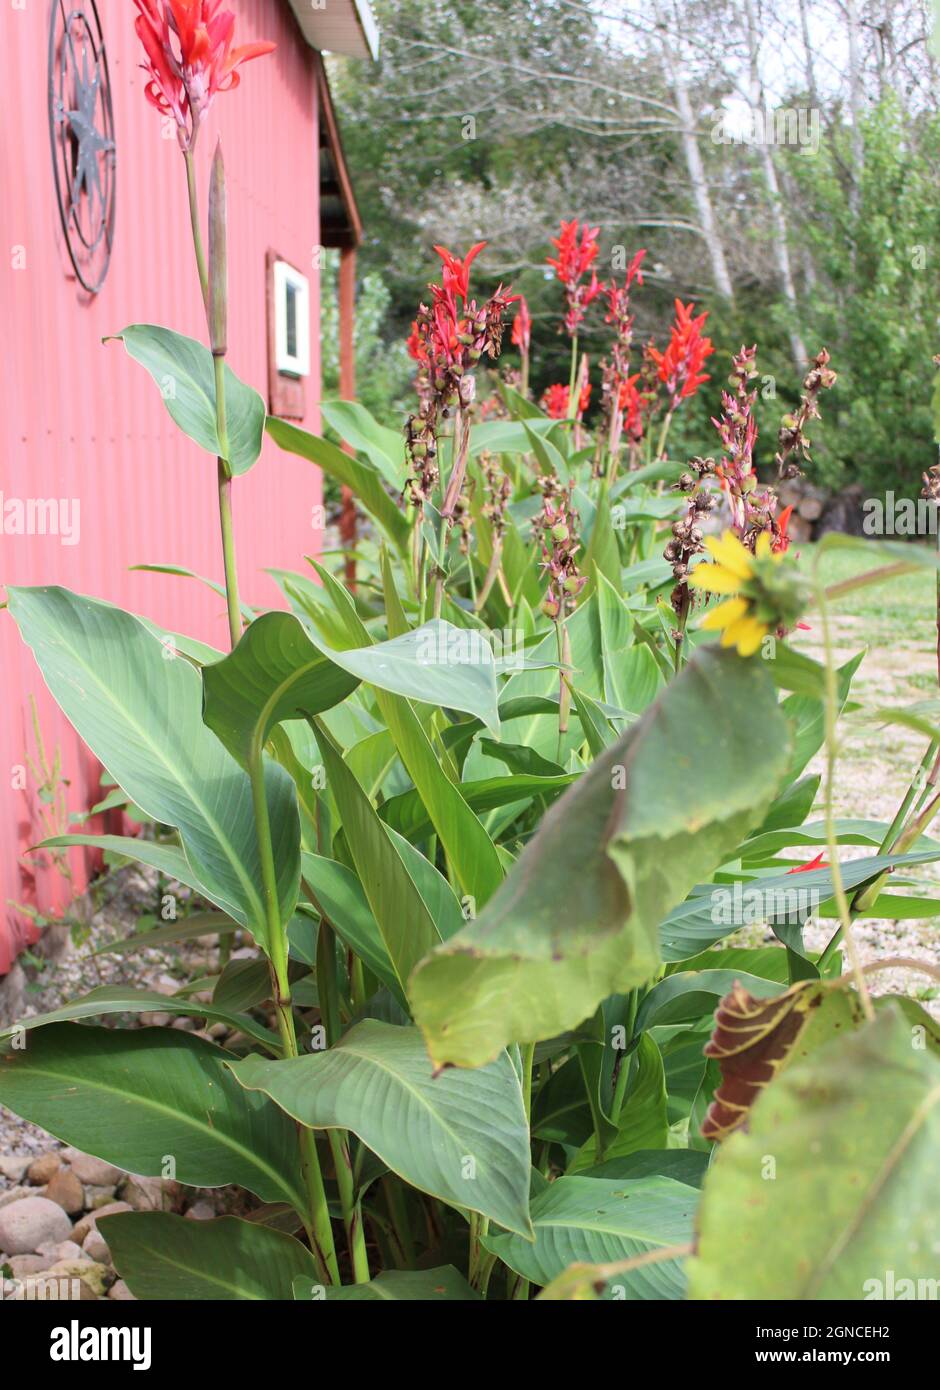 Canna flowers along a red barn. Stock Photo